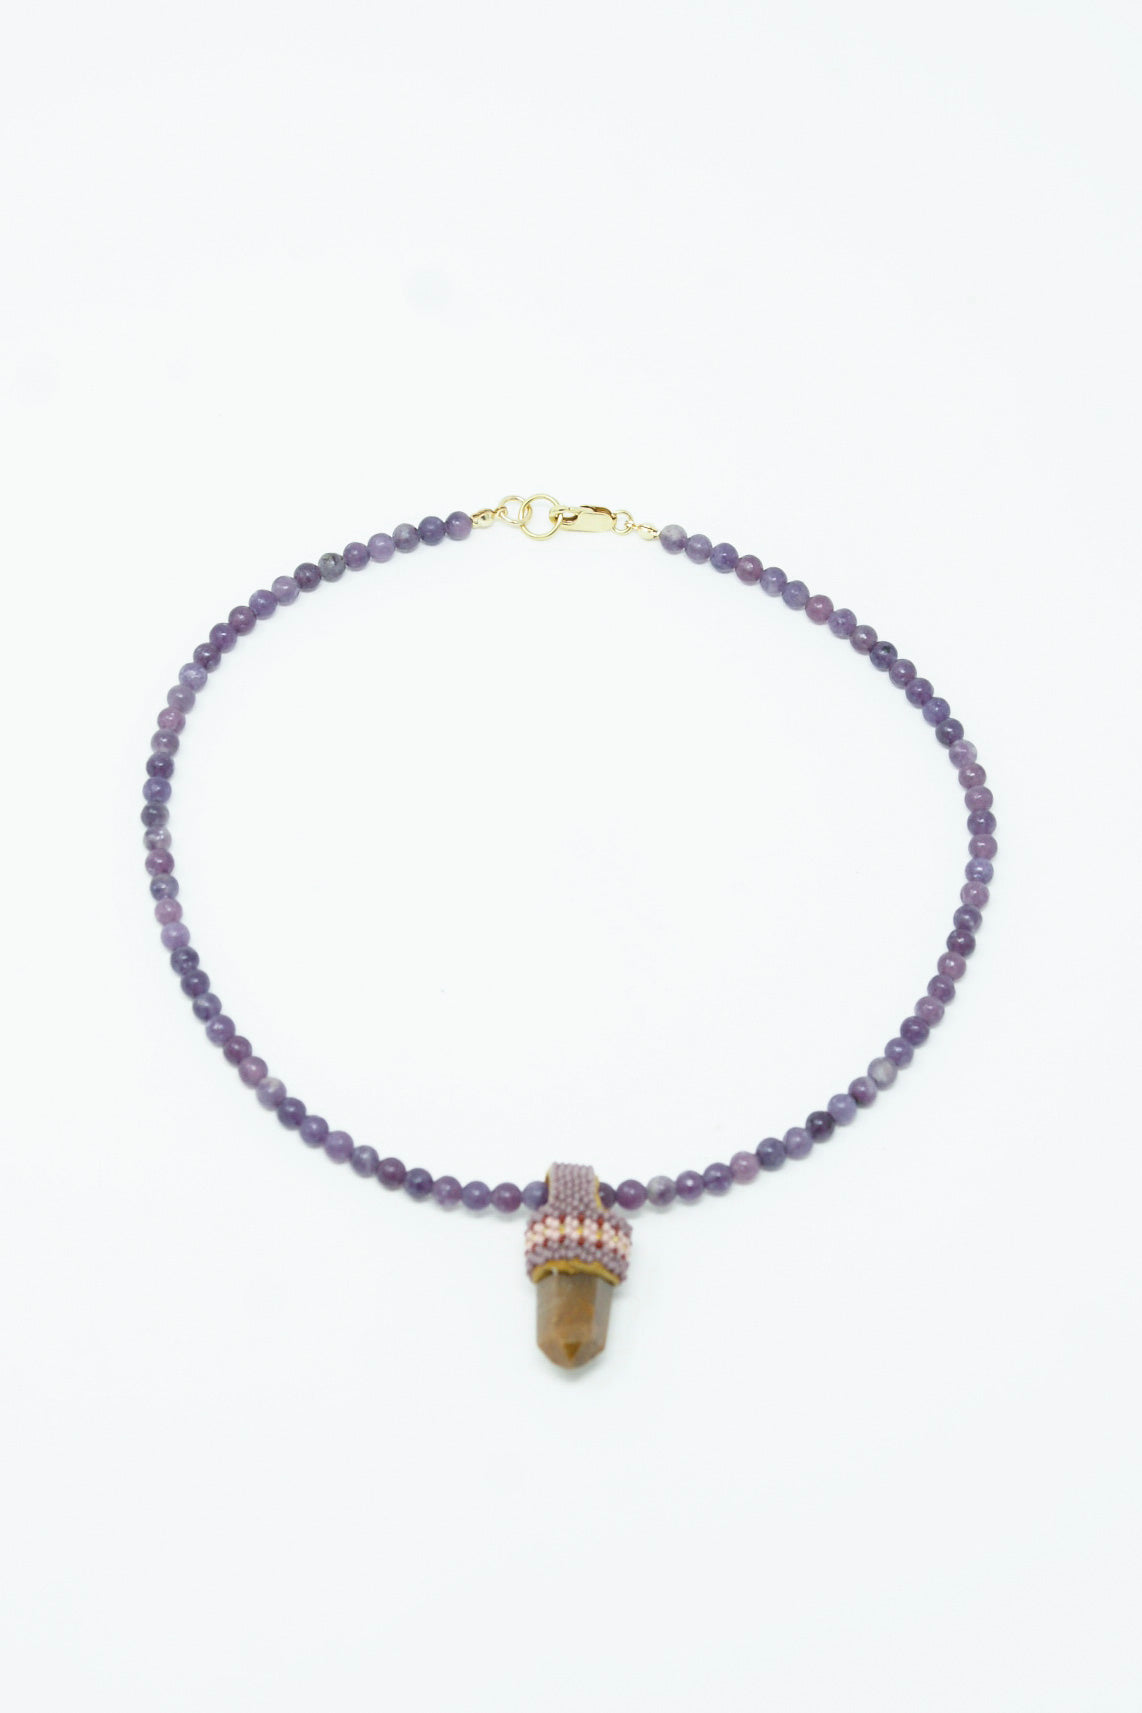 Amethyst cactus Pendulum Necklace in Lepidolite Purple Beads, Rutilated Quartz Crystal by Robin Mollicone featuring a long necklace with hints of lepidolite and rutilated quartz.